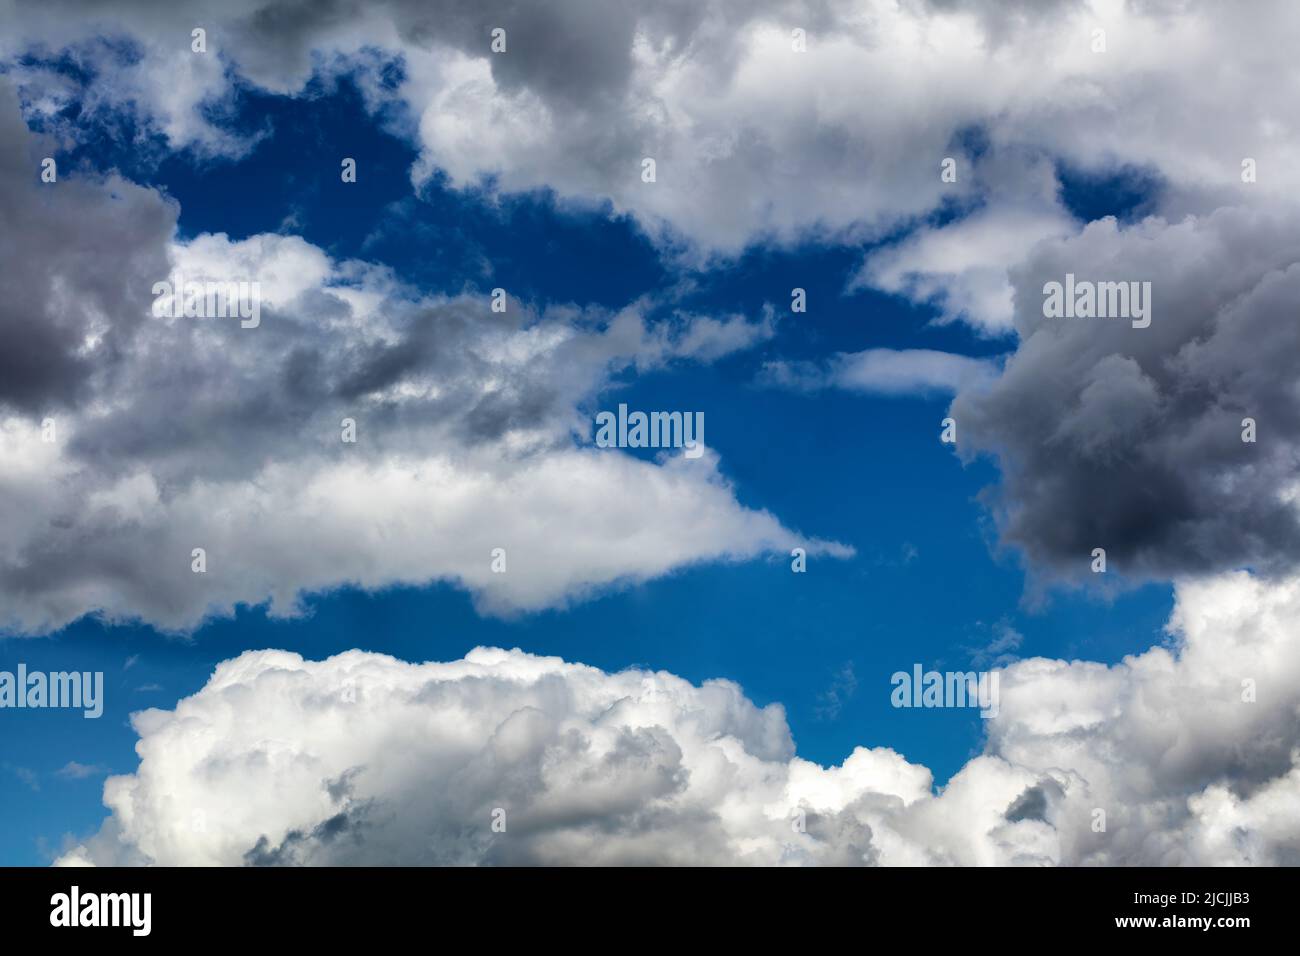 Rolling ominous clouds with pending storm coming Stock Photo